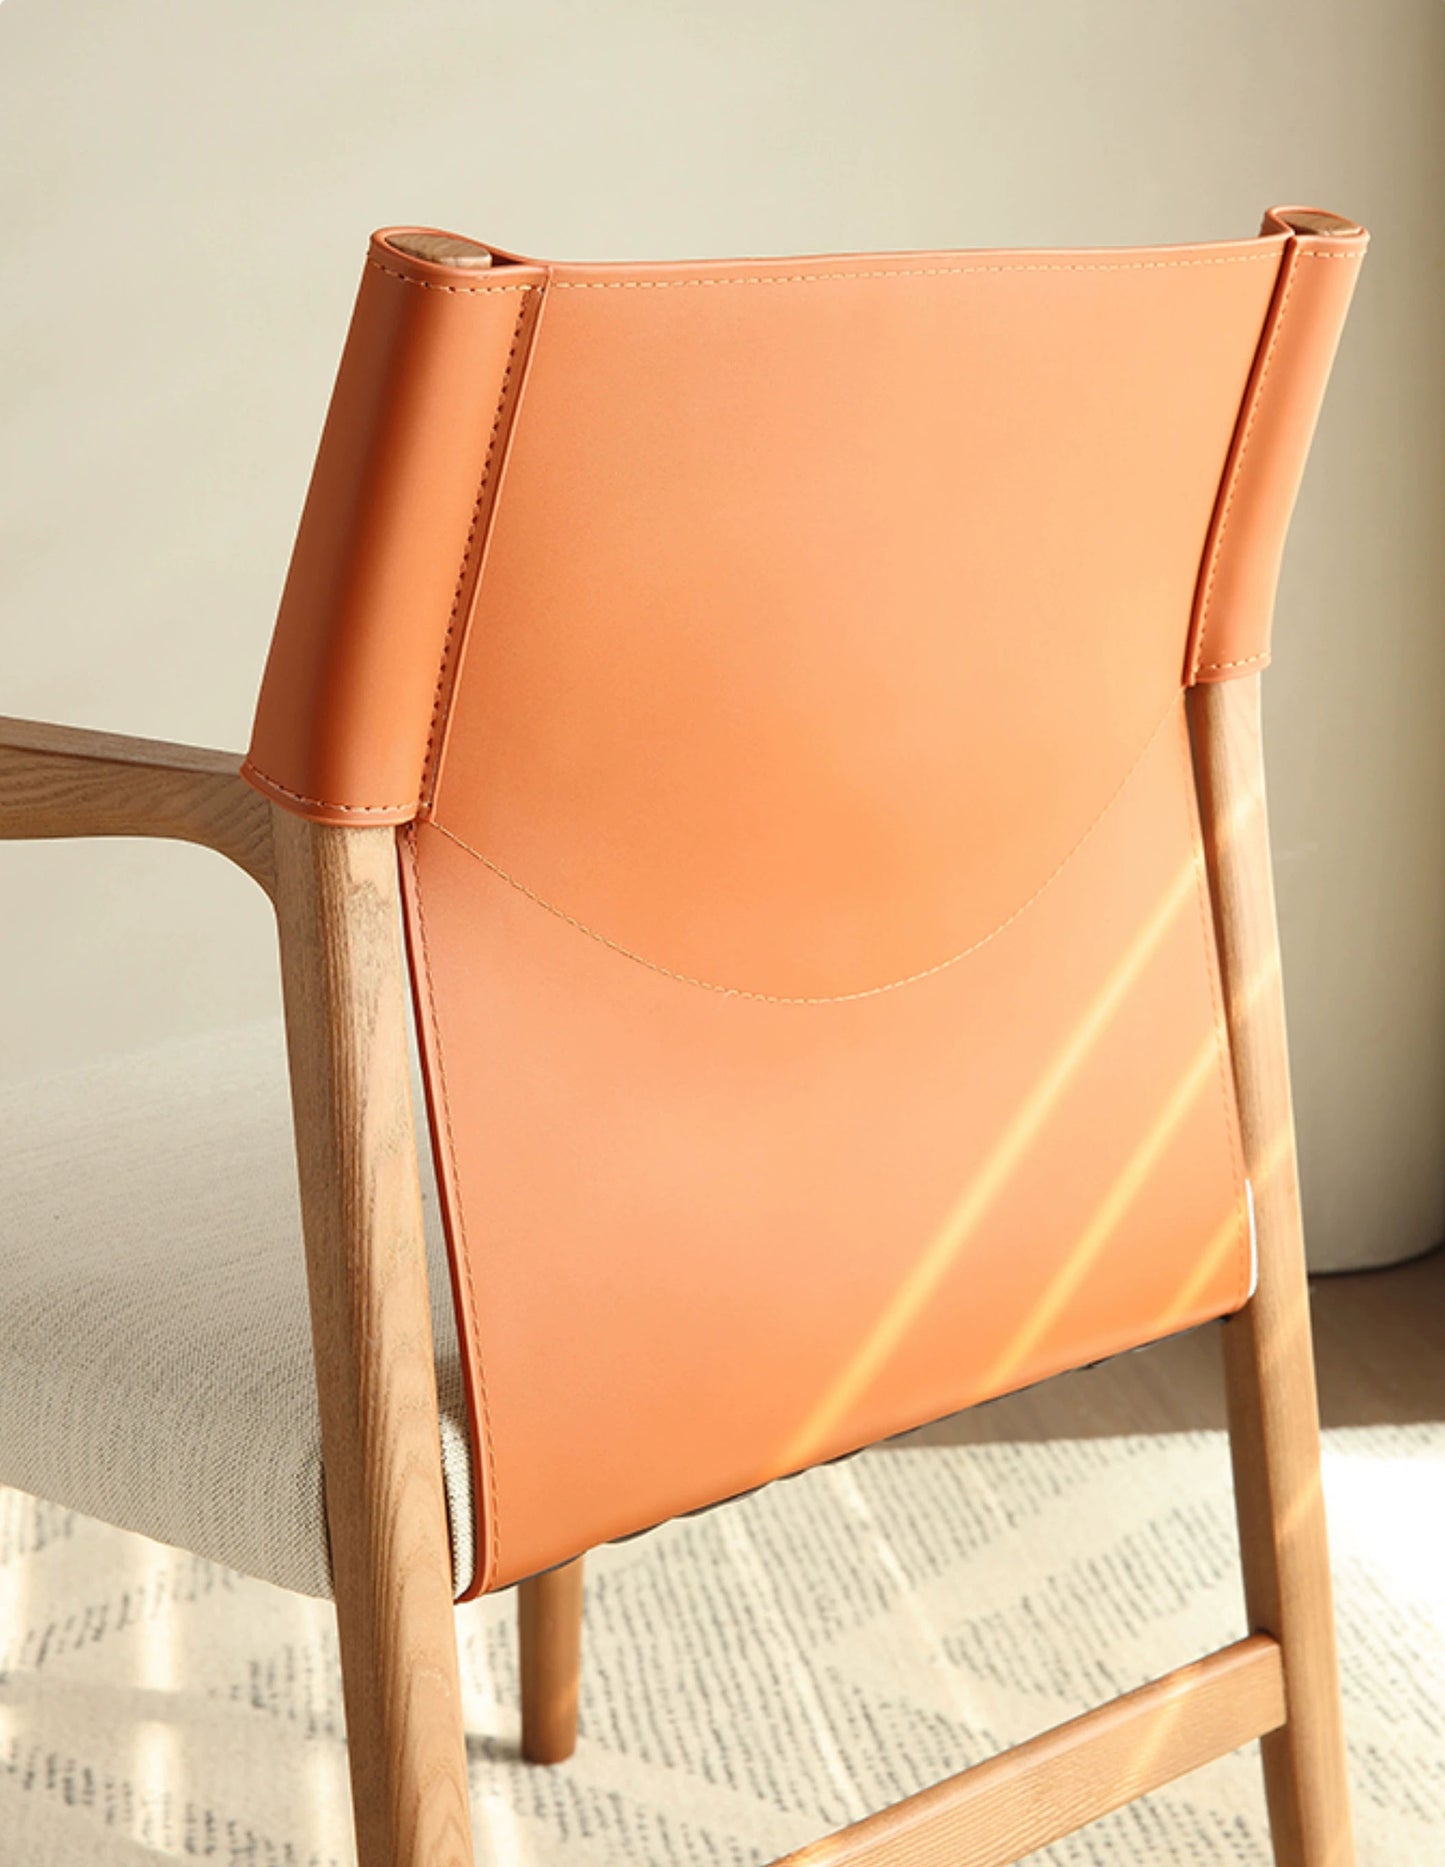 Pree Wooden Dining Chair from maija